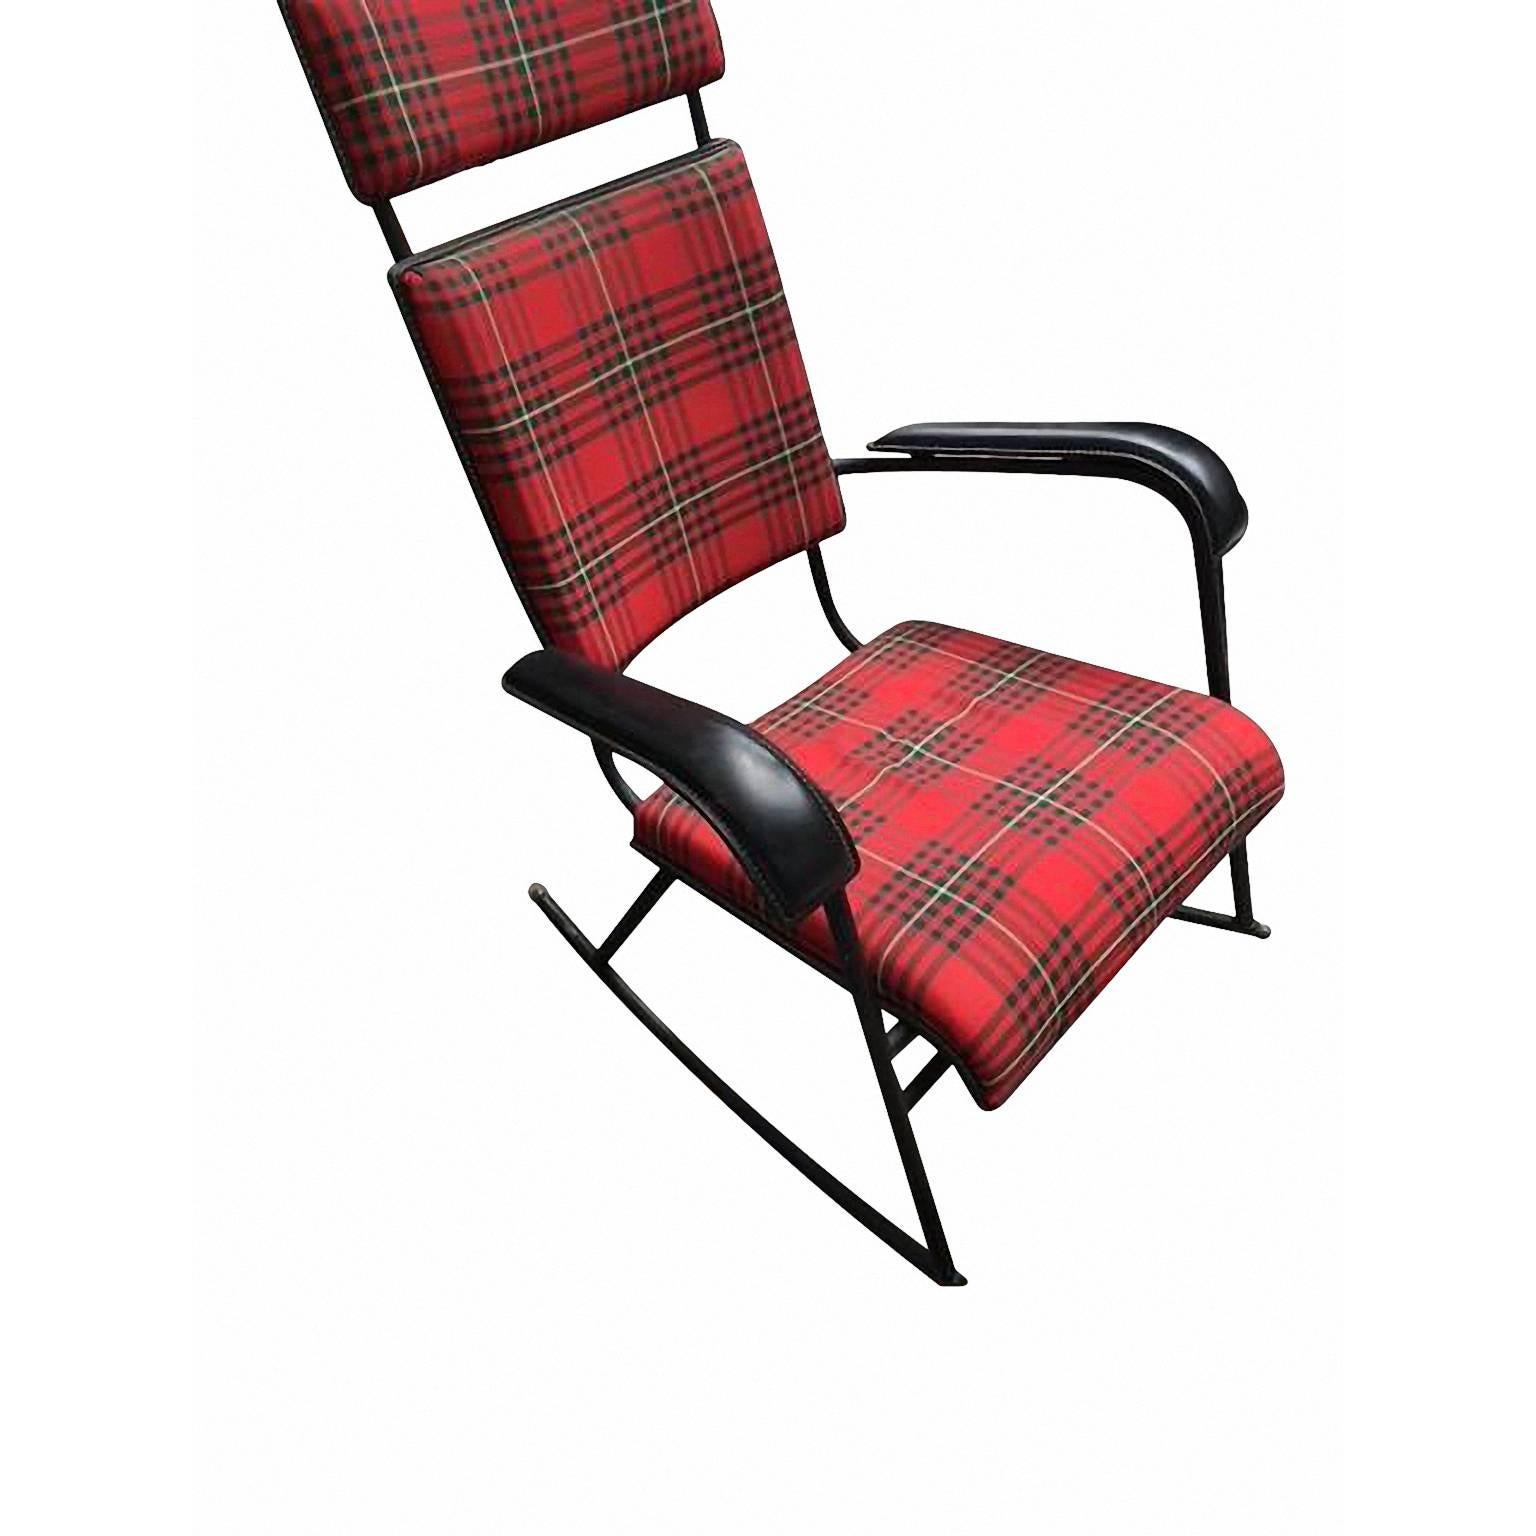 French Jacques Adnet 1950s Rare Tartan Rocking Chair For Sale